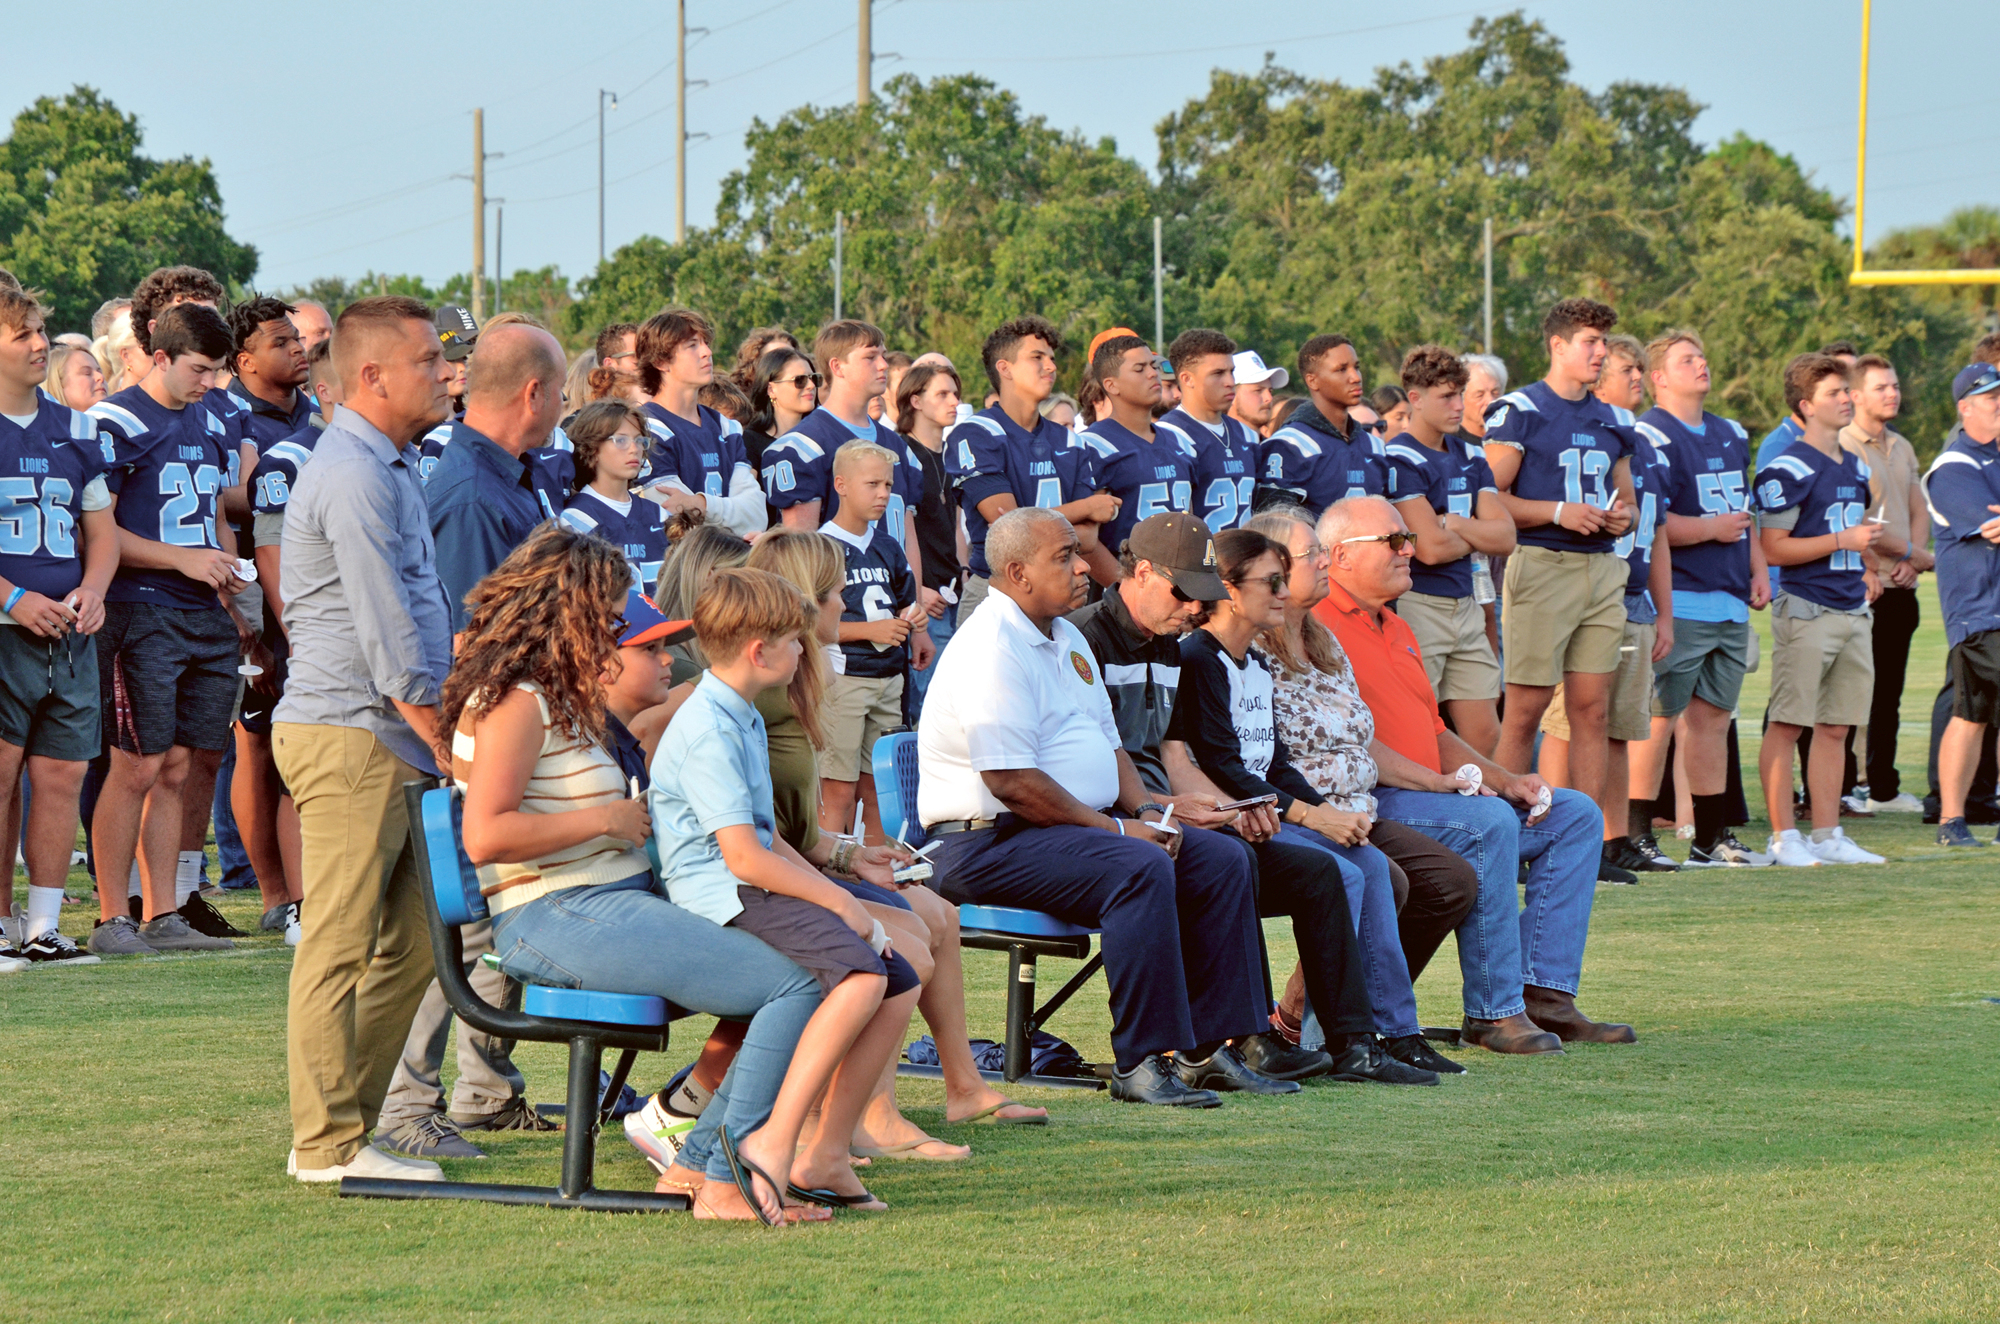 The Foundation Academy football team and many folks in the community attended the candlelight vigil at the school. The Fitzgibbons, seated in center, said they are grateful for the tremendous support.